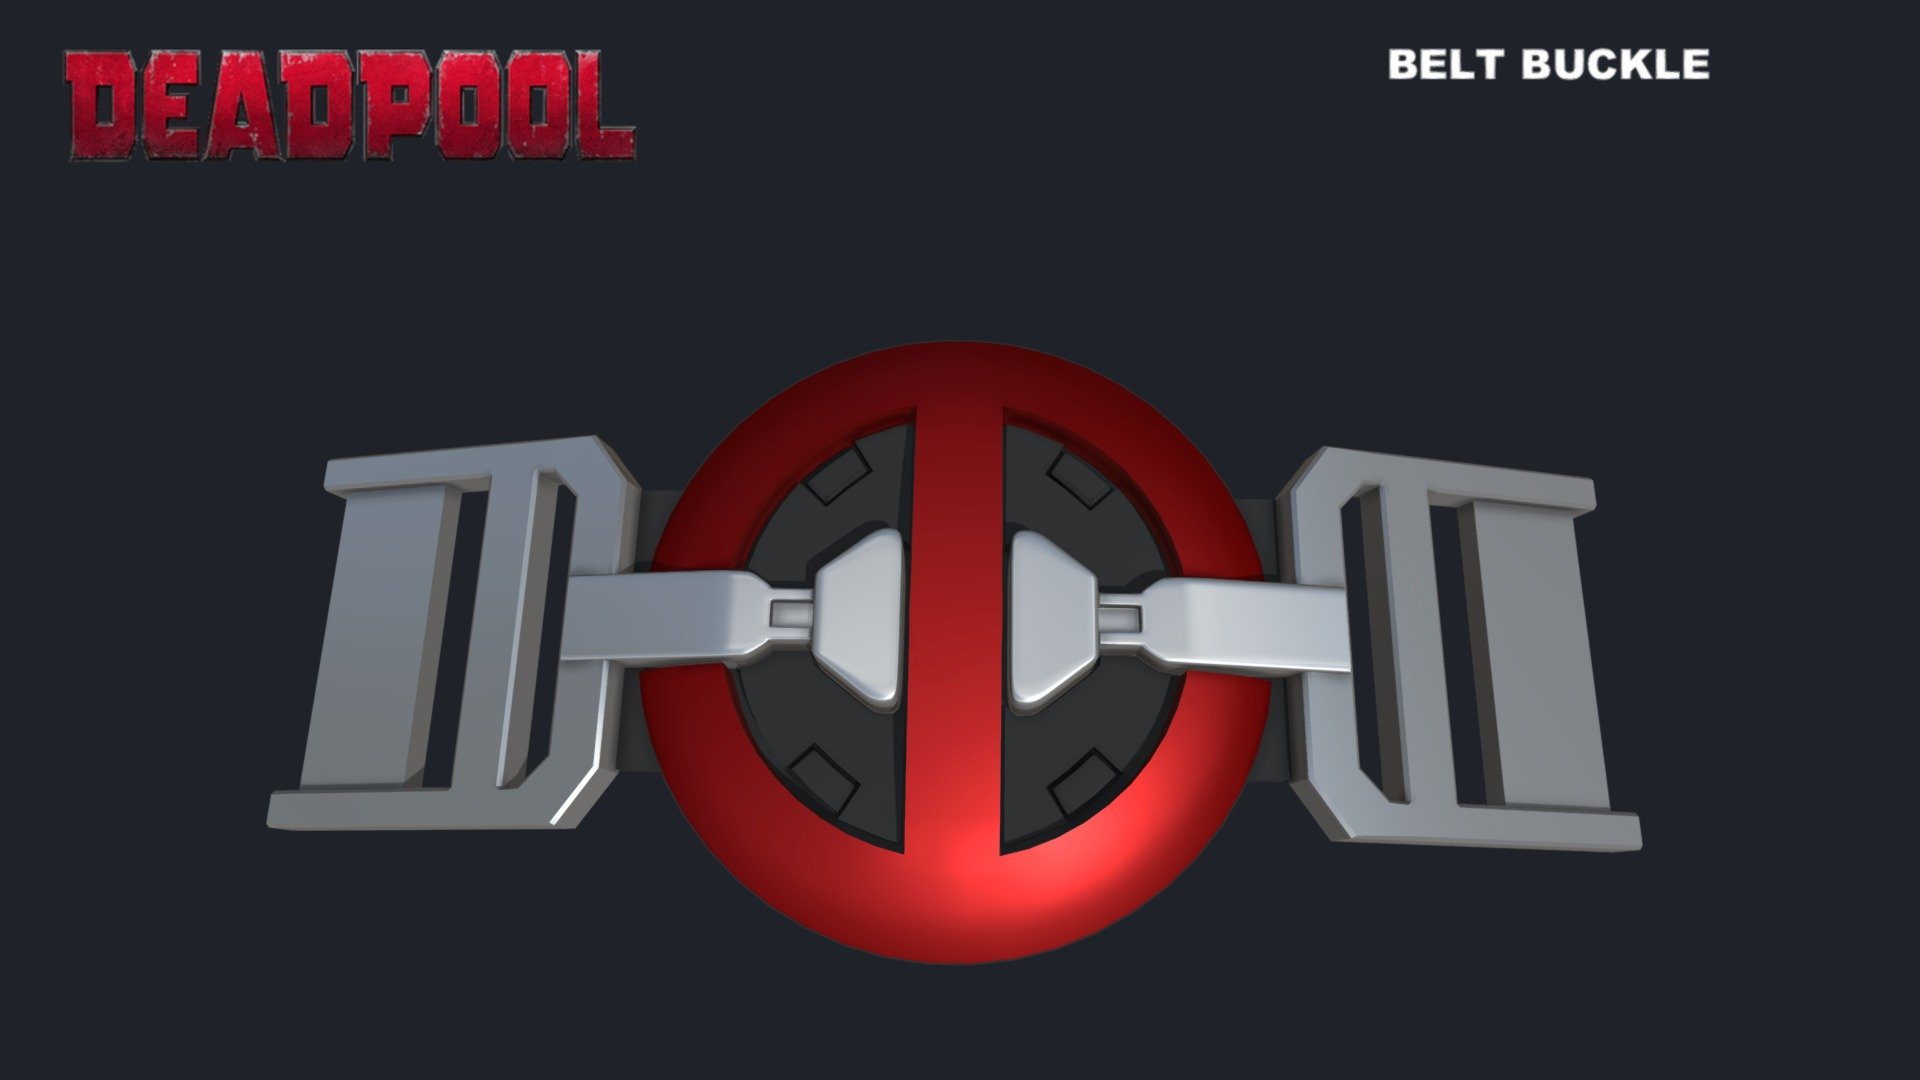 my model of Deadpool's belt buckle. This is a work in progress so it may change. Modelled in 3DS Max.

visit here to see how I designed this for 3D printing  https://sketchfab.com/3d-models/deadpool-buckle-copy2-823f7c35d4d947faba8edd5e051af1ee

Thanks for looking :) - Deadpool buckle - 3D model by paulelderdesign 3d model